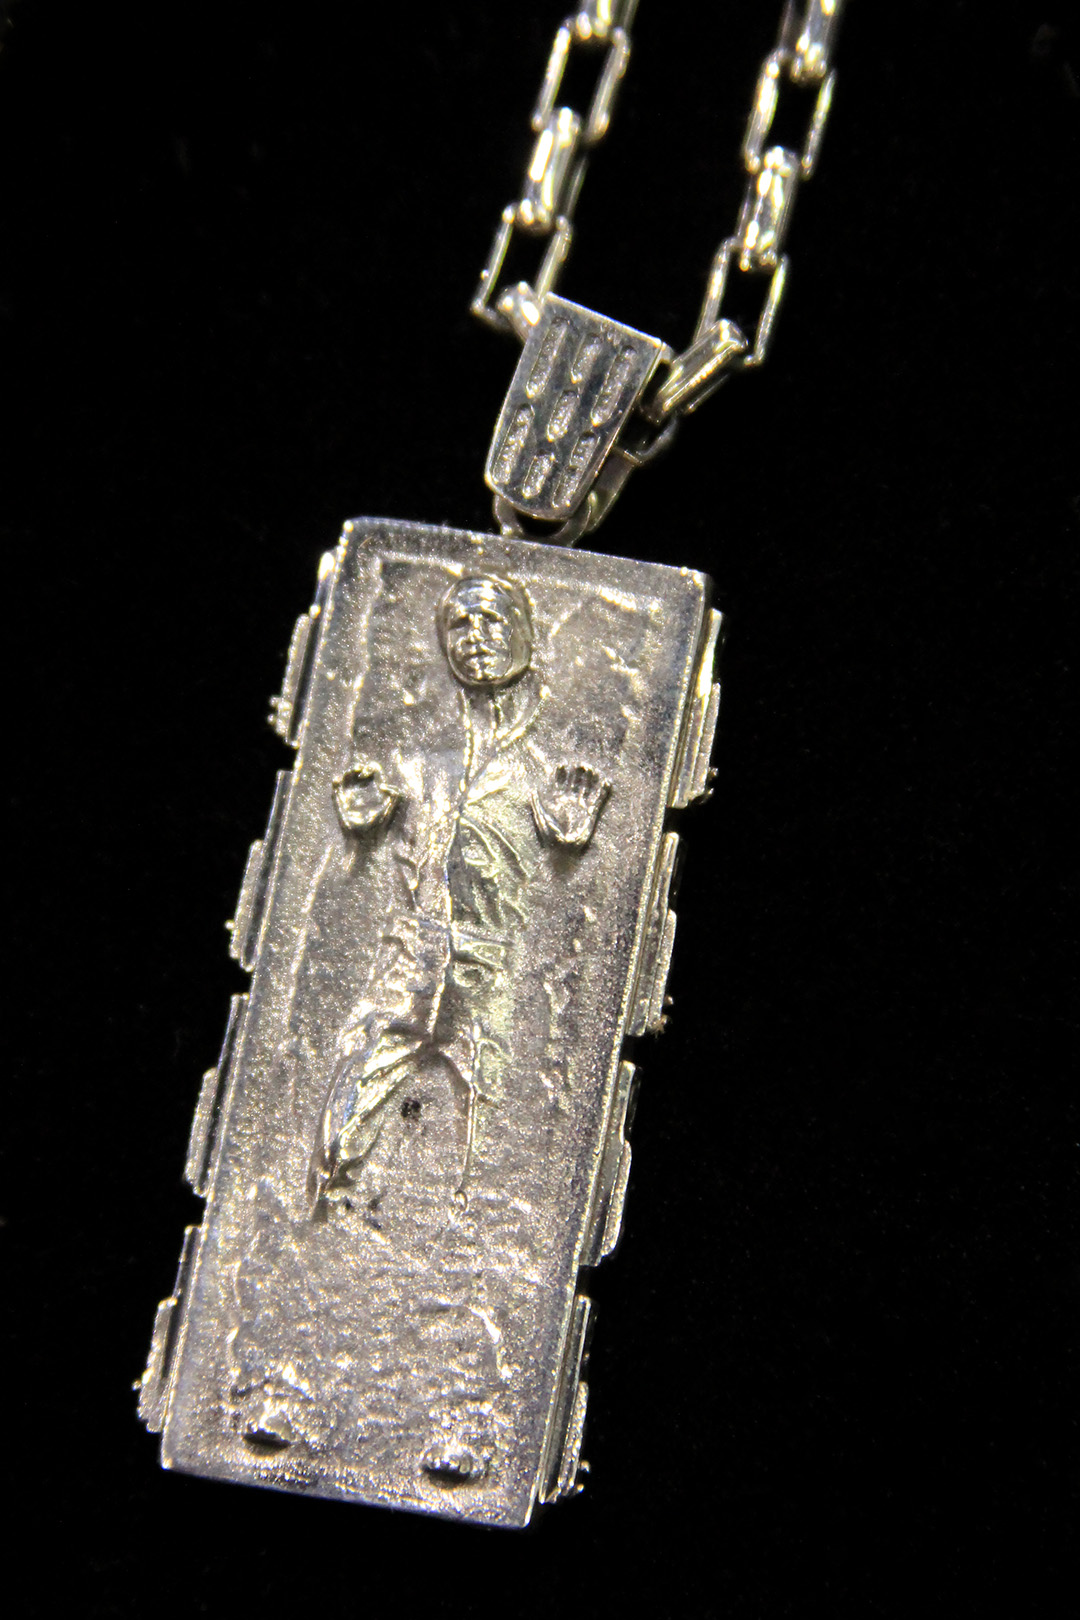 Han Cholo - Han in Carbonite necklace